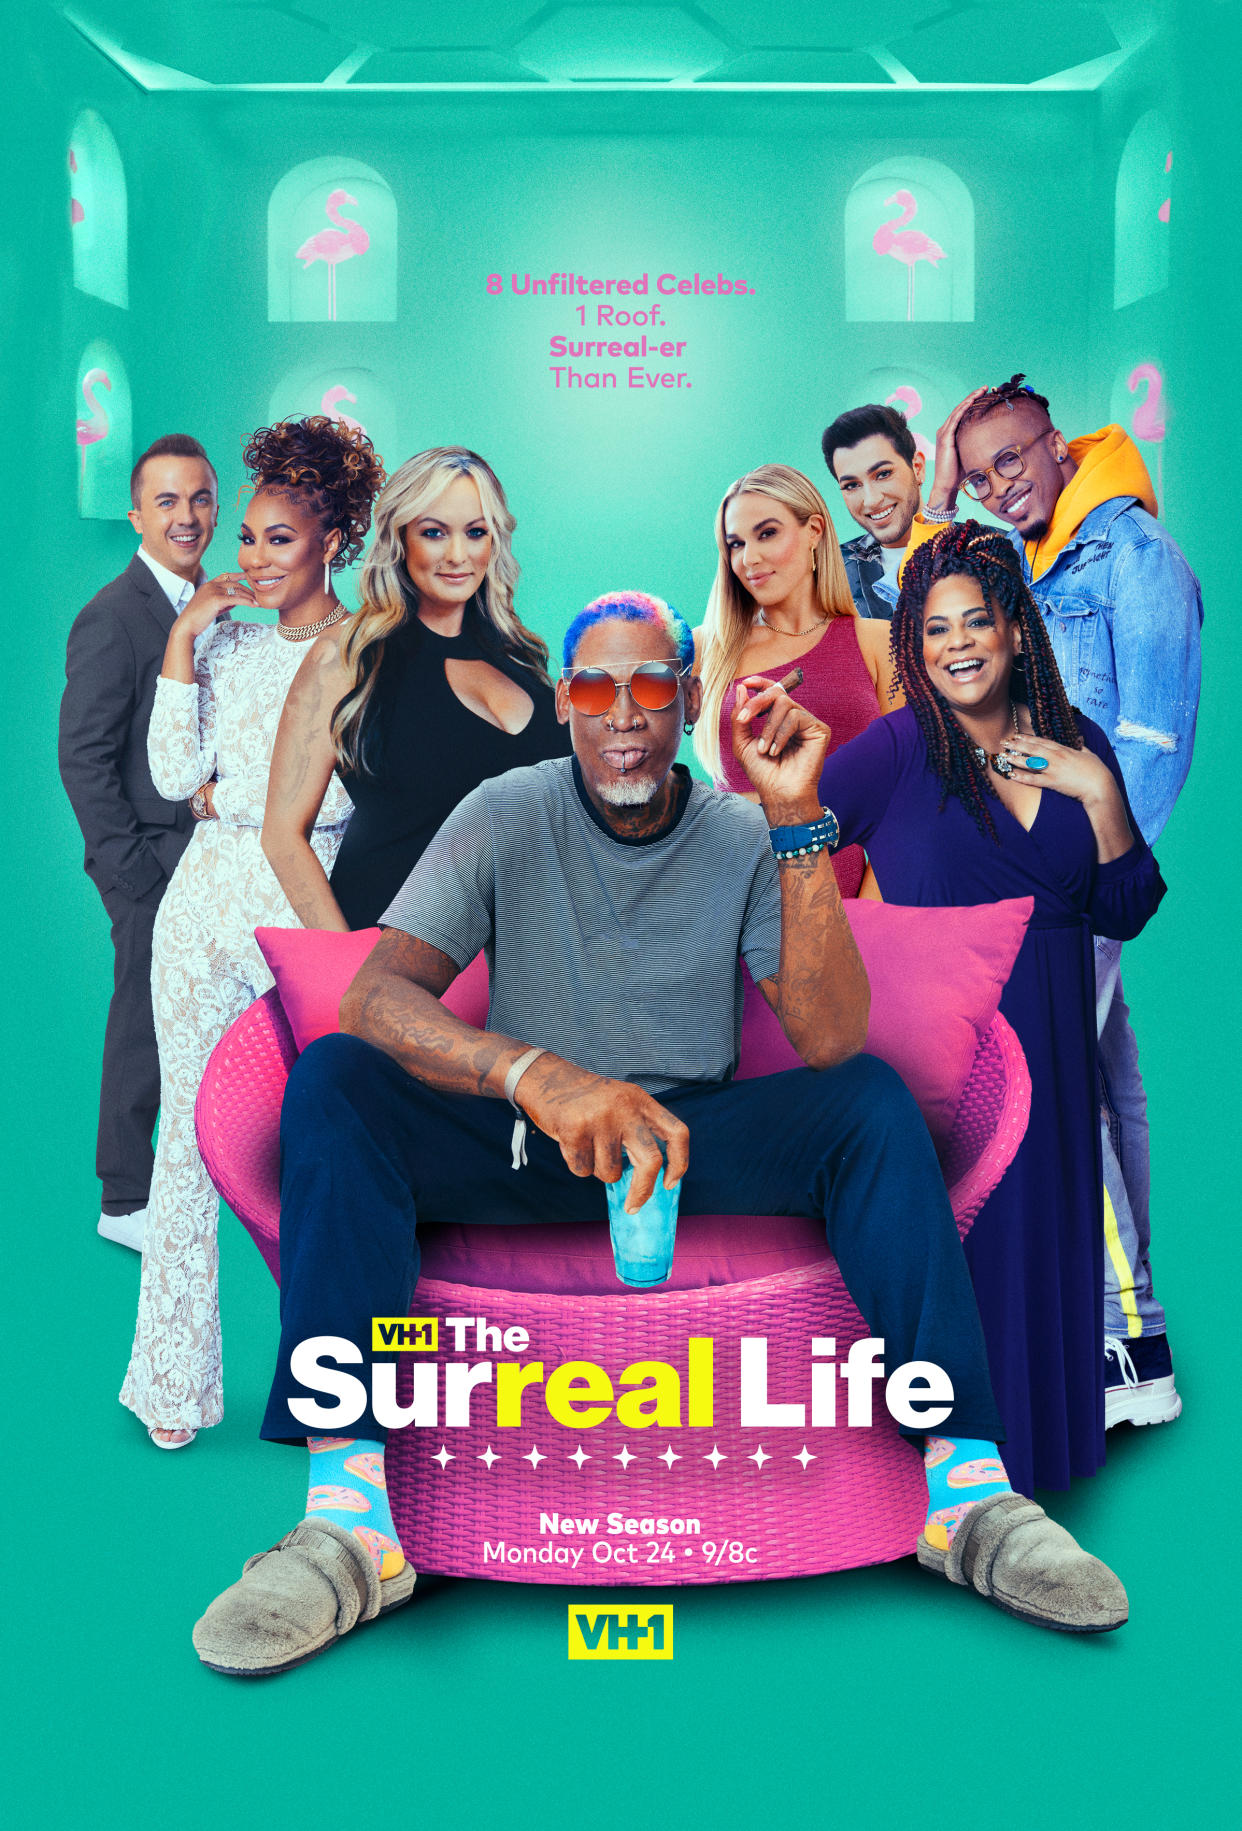 Perry joins seven other celebrities under one roof in The Surreal Life, the first time the VH1 show has appeared on television since 2006. (Photo: VH1)